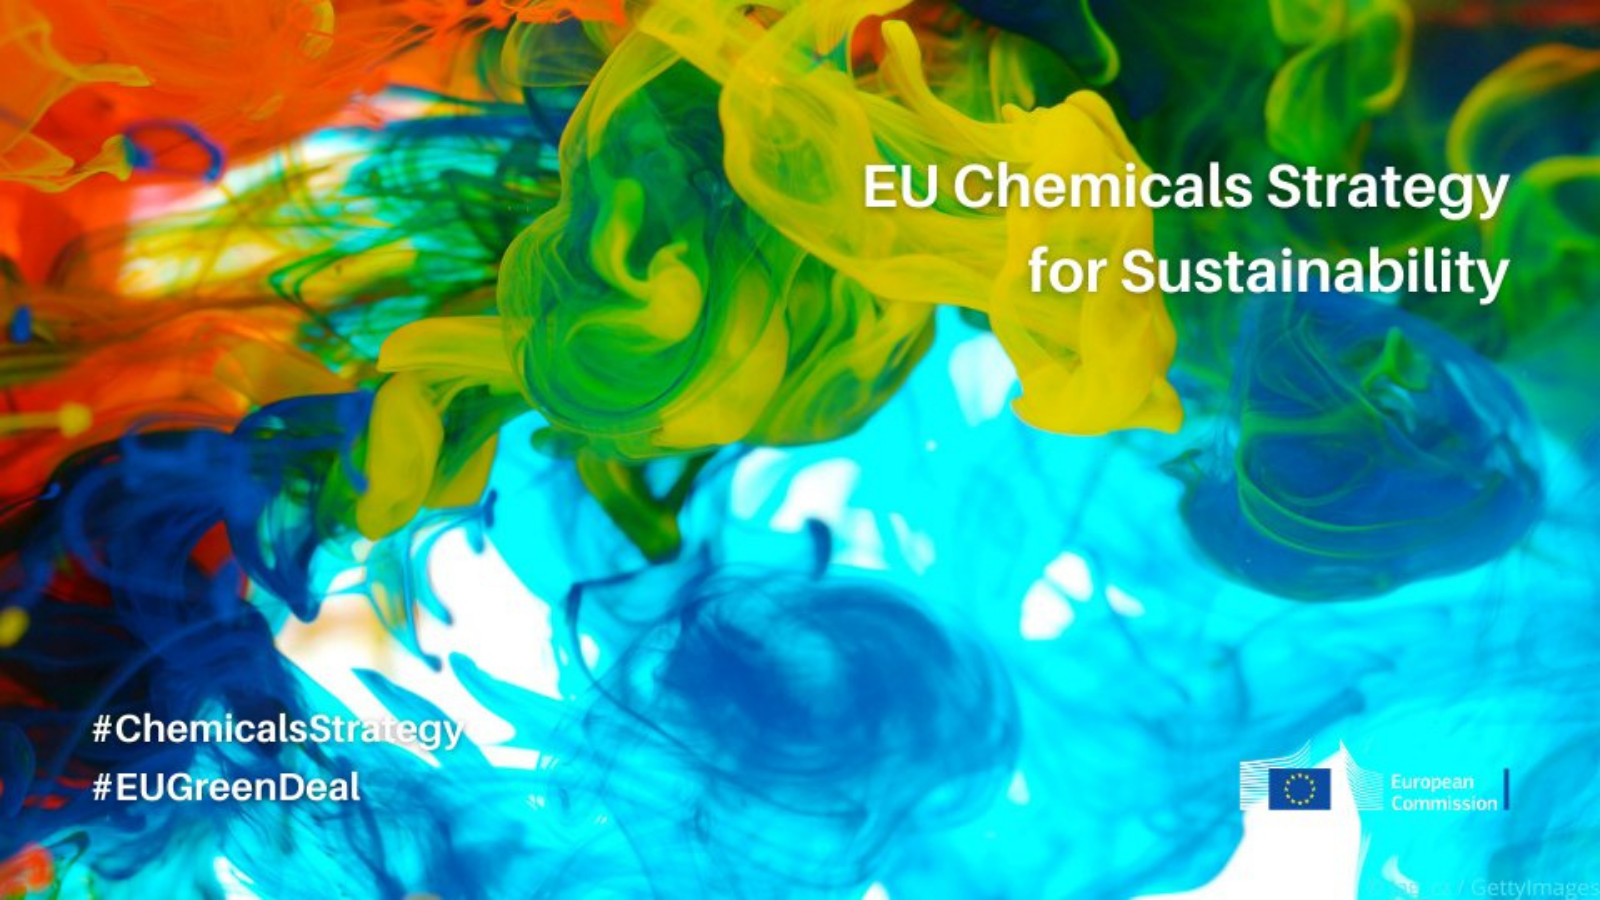 The workers’ voice at the High Level Round Table Chemicals Strategy for Sustainability